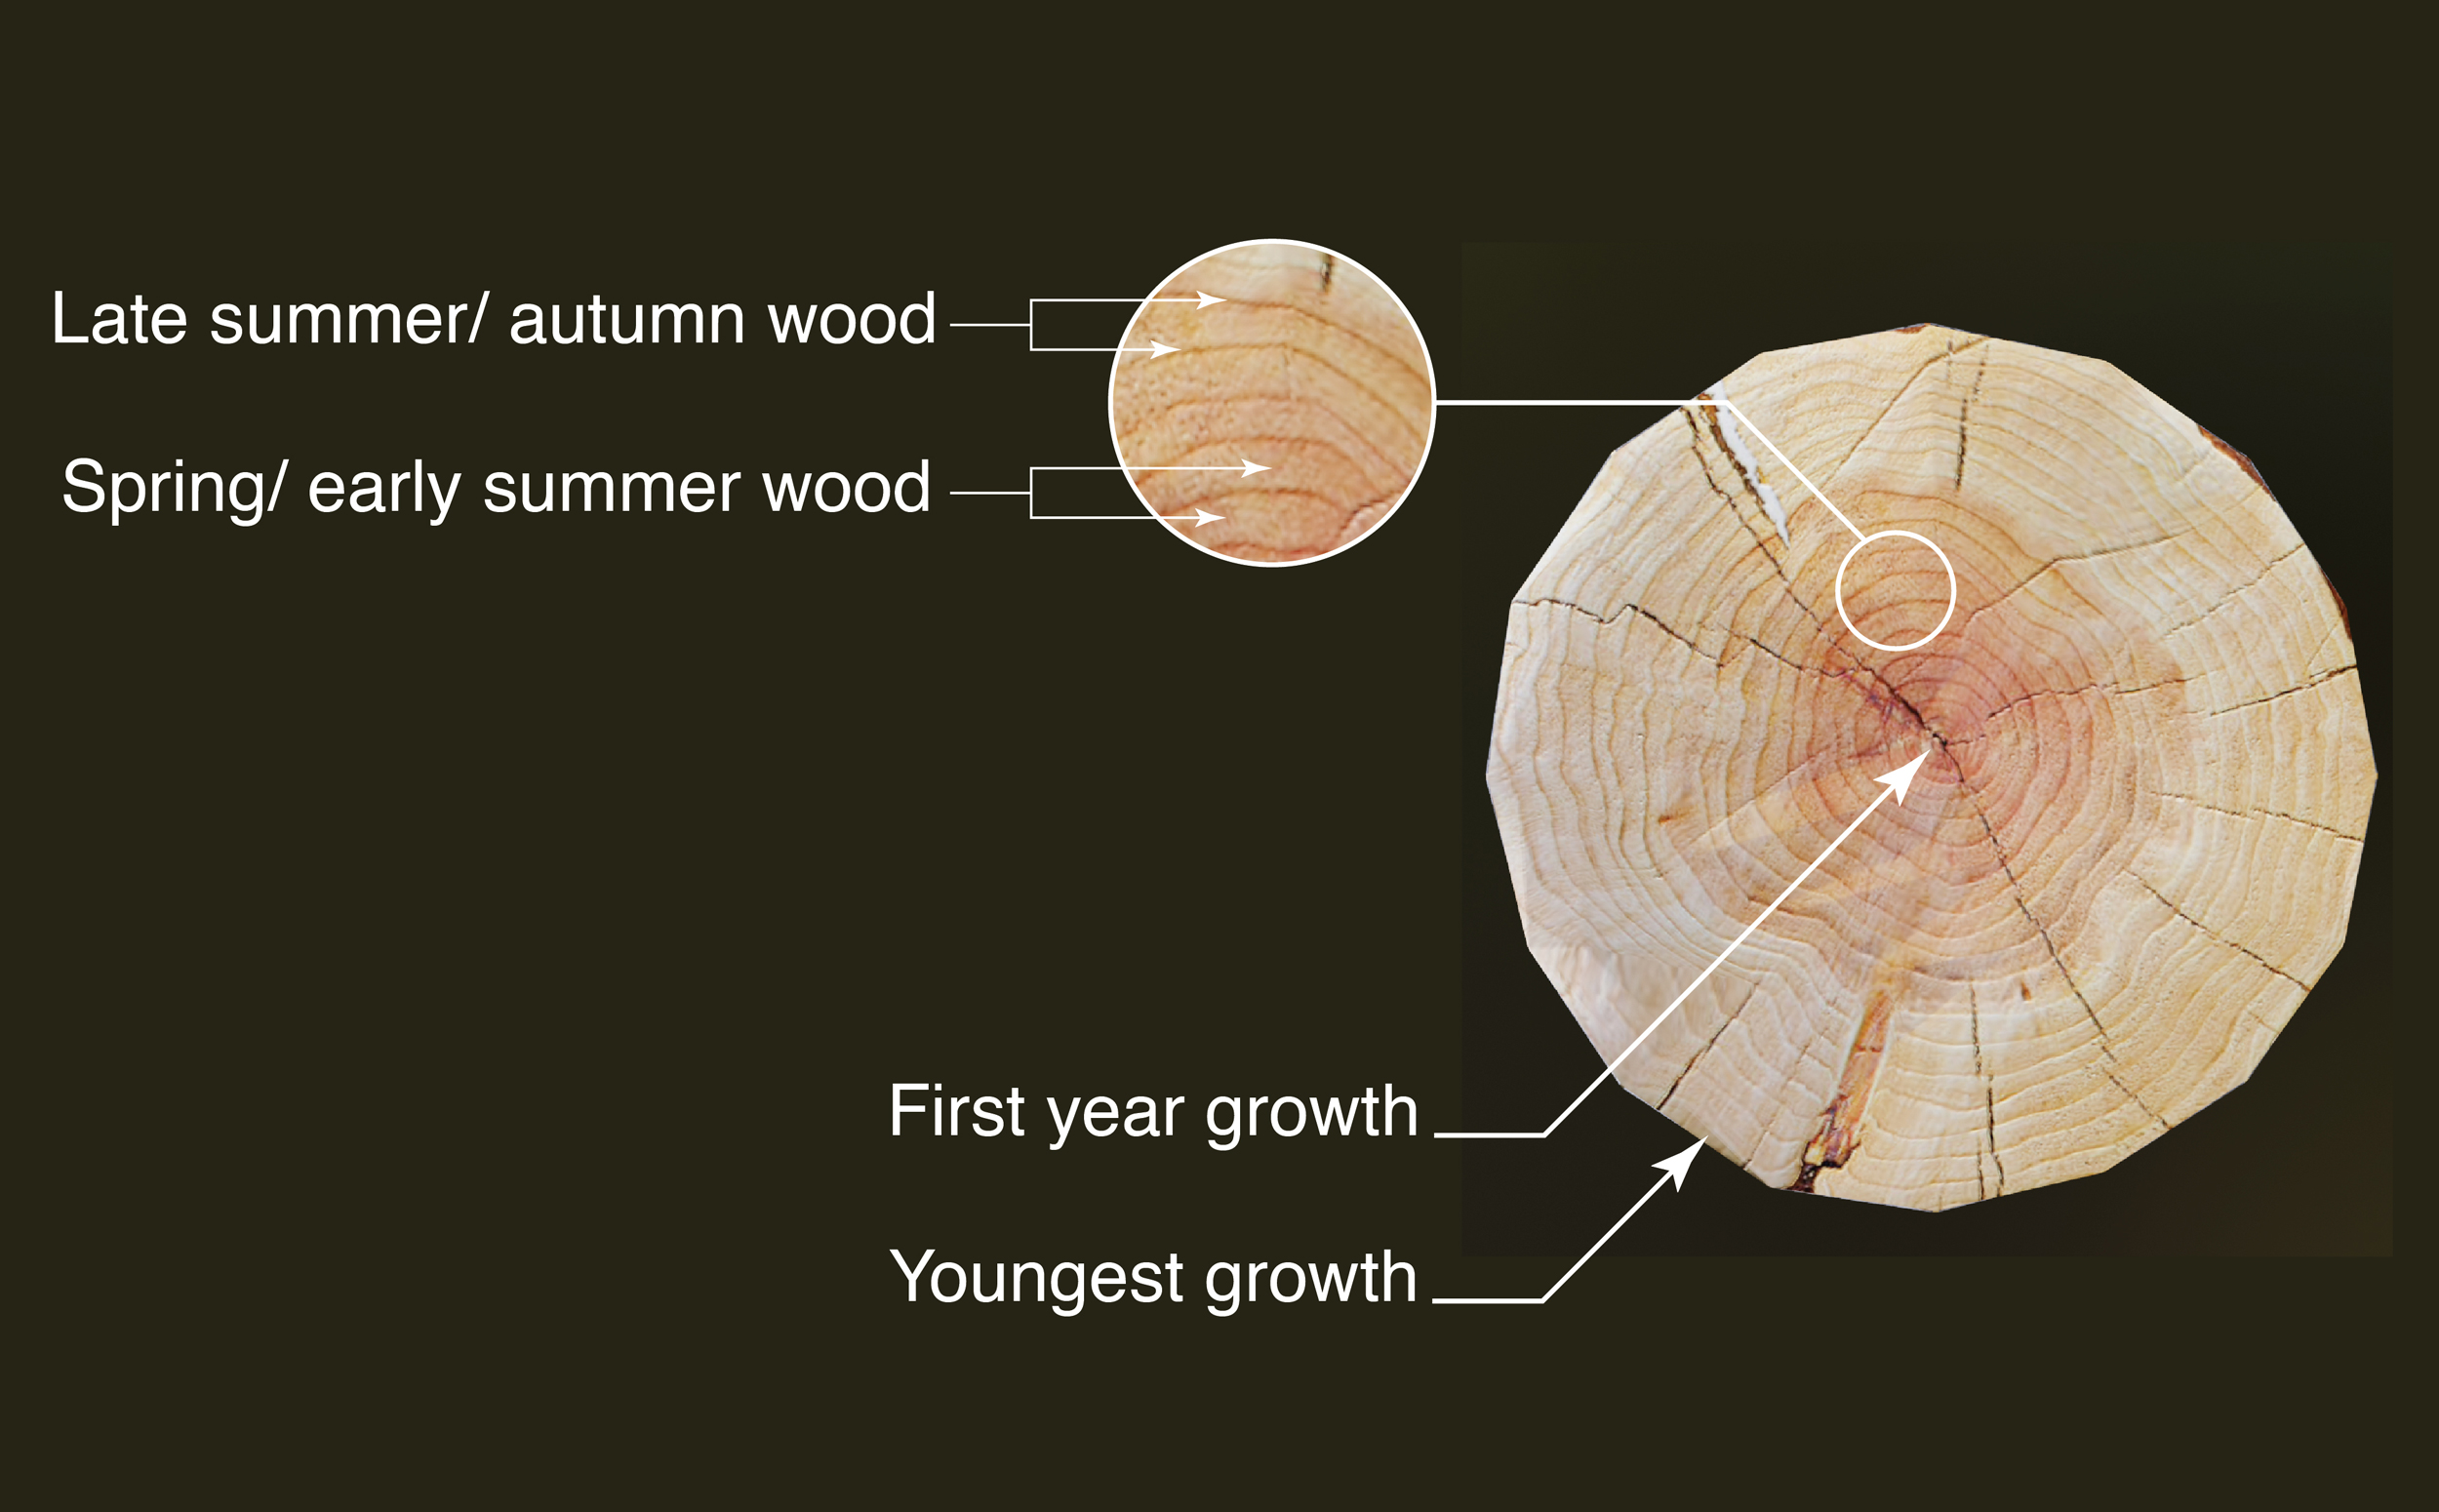 The seasonal growth in a tree’s girth forms measurable concentric rings every year which persist throughout the lifetime of a tree (click to zoom)